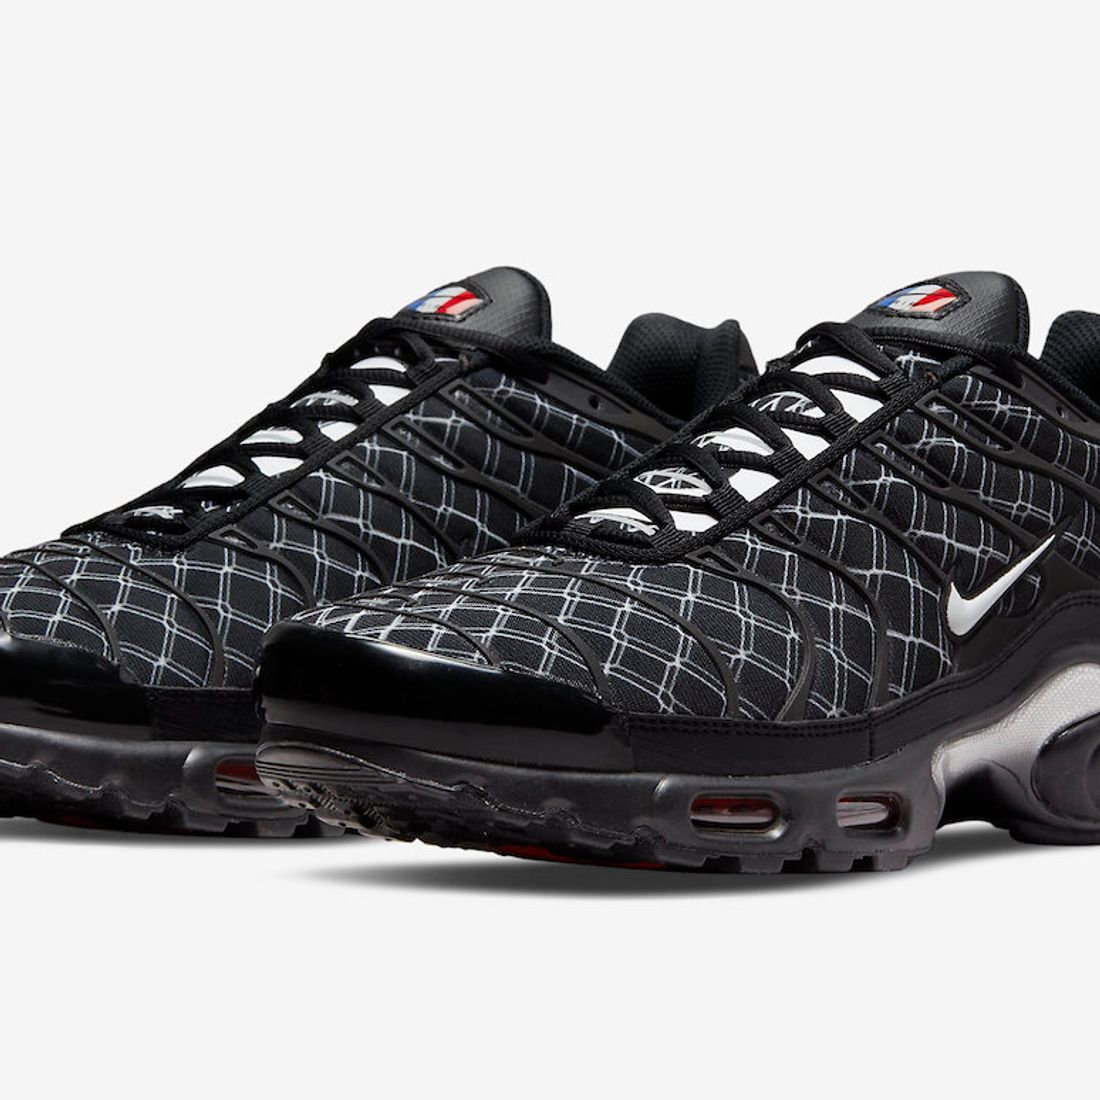 marker Raise yourself sensitivity Official Images: Nike Air Max Plus 'France' - Sneaker Freaker